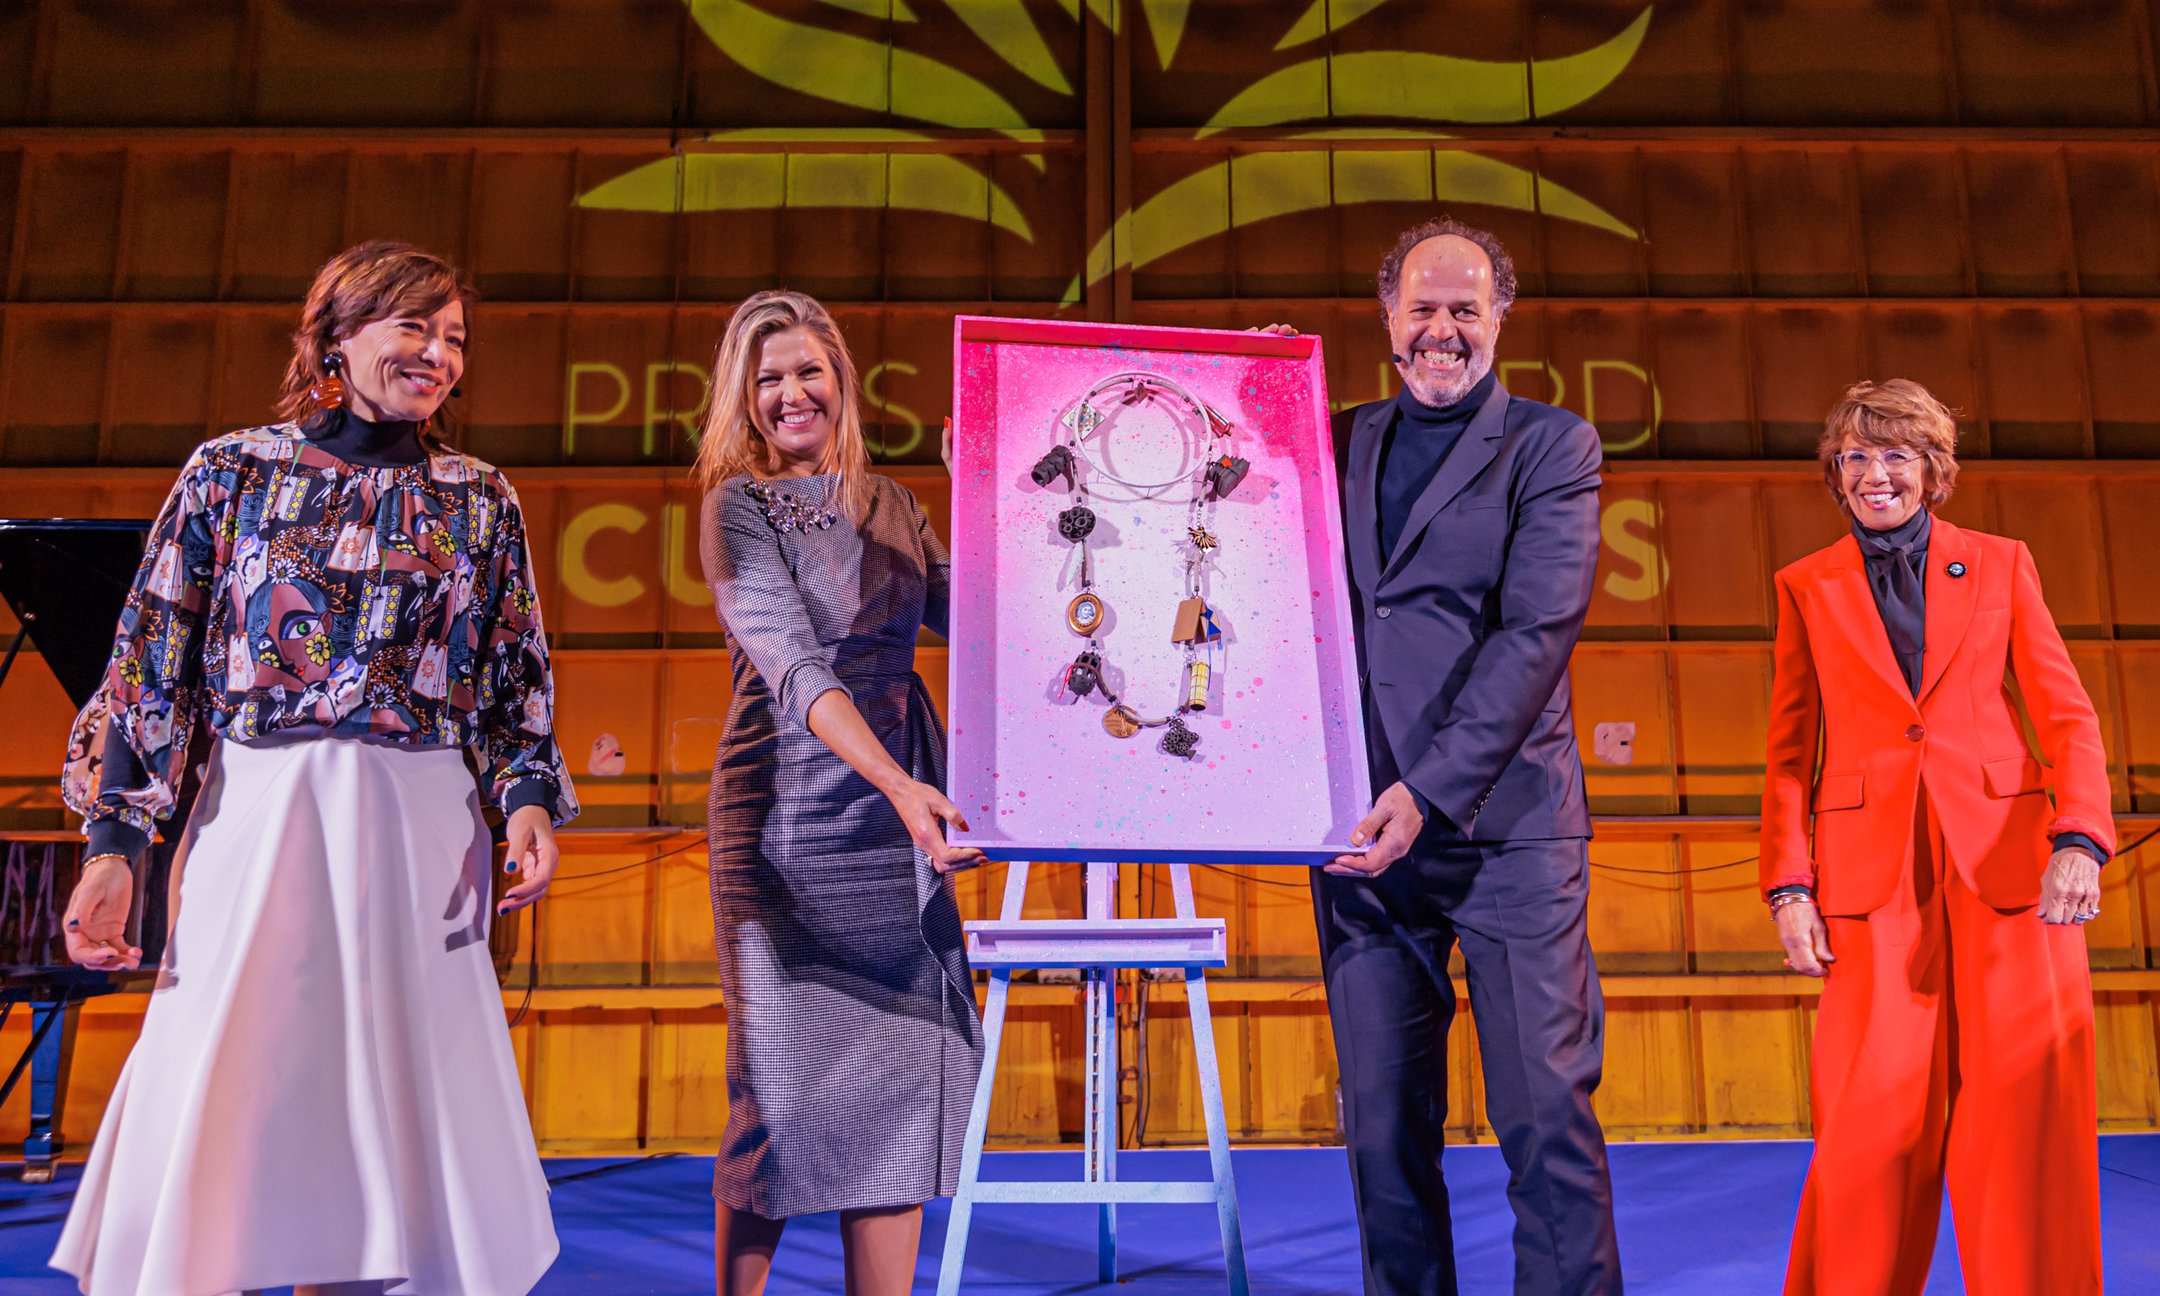 From left to right Cathelijne Broers (director Prins Bernhard Cultuur Fonds), Queen Máxima, Ronald Leopold and Pauline Meurs (chair Prins Bernhard Cultuur Fonds)